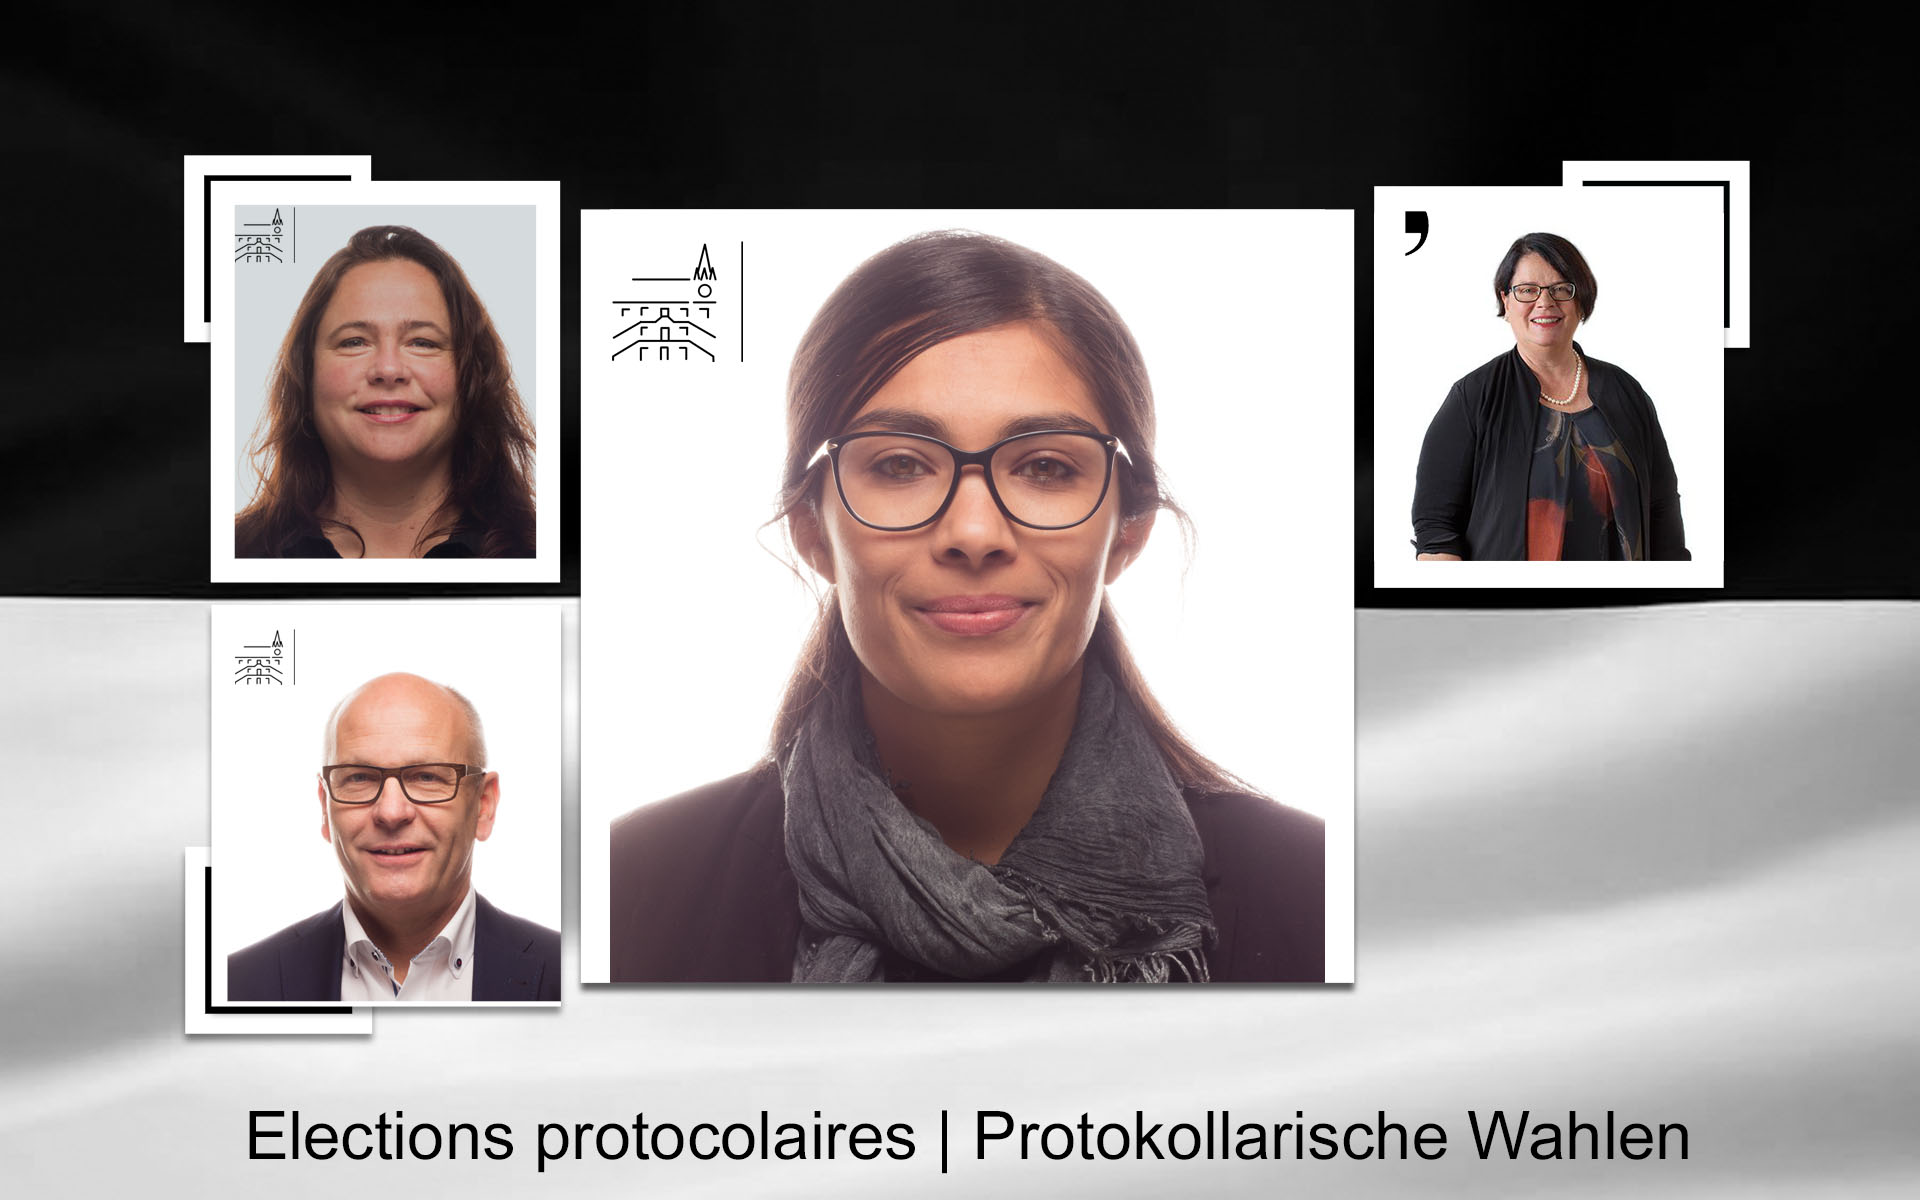 Elections protocolaires 2019